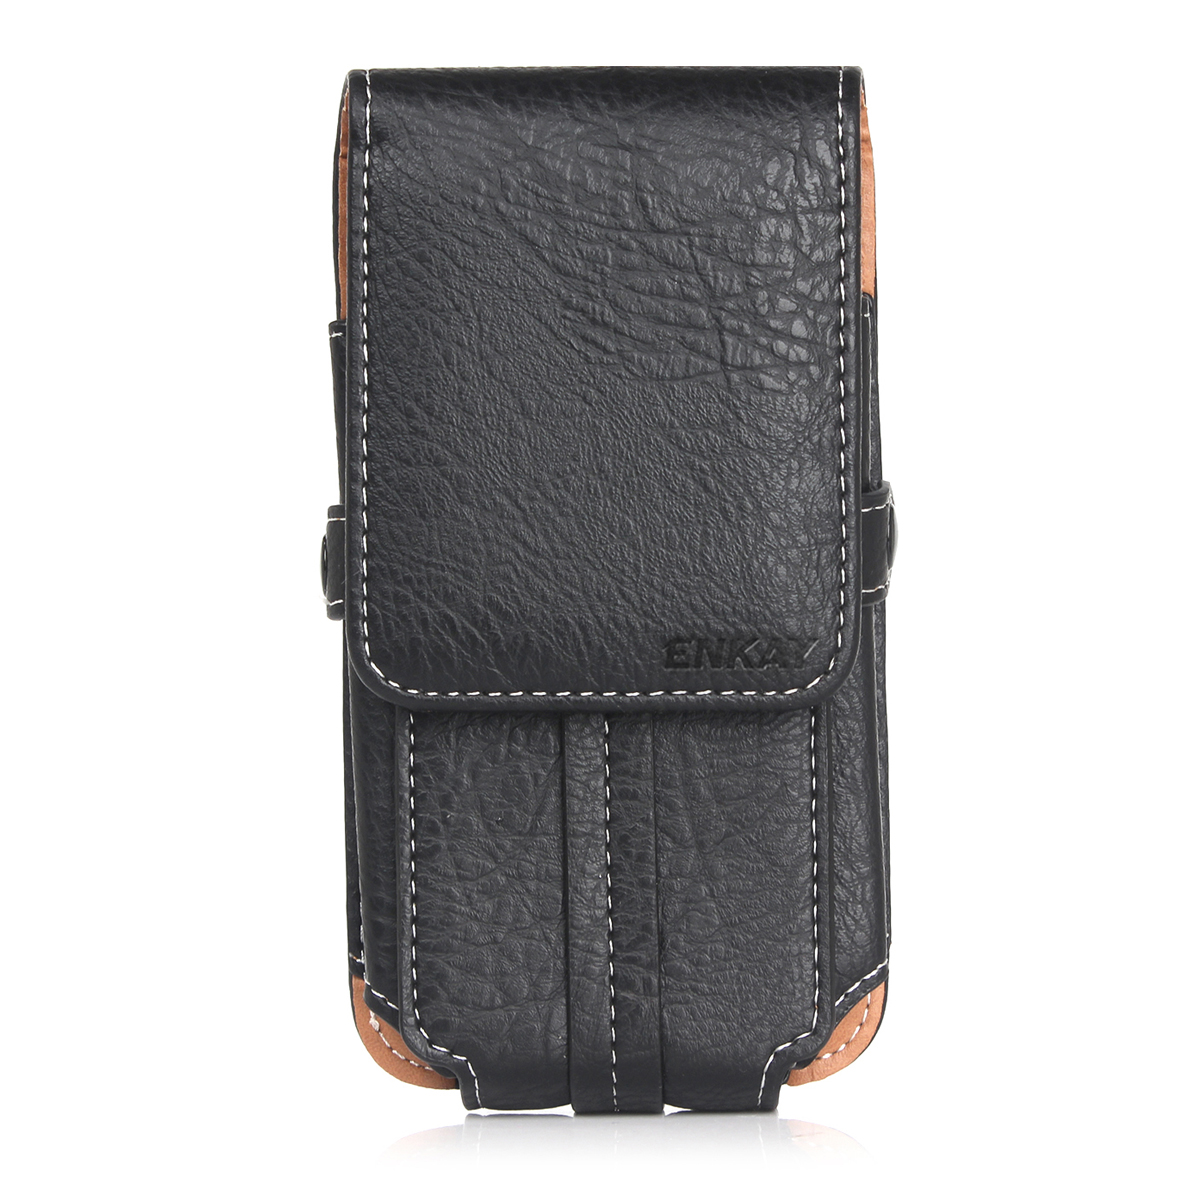 ENKAY-Waist-Bag-PU-Stone-Texture-Leather-Phone-Bag-Wallet-Case-for-iPhone-Samsung-Xiaomi-Sony-1121901